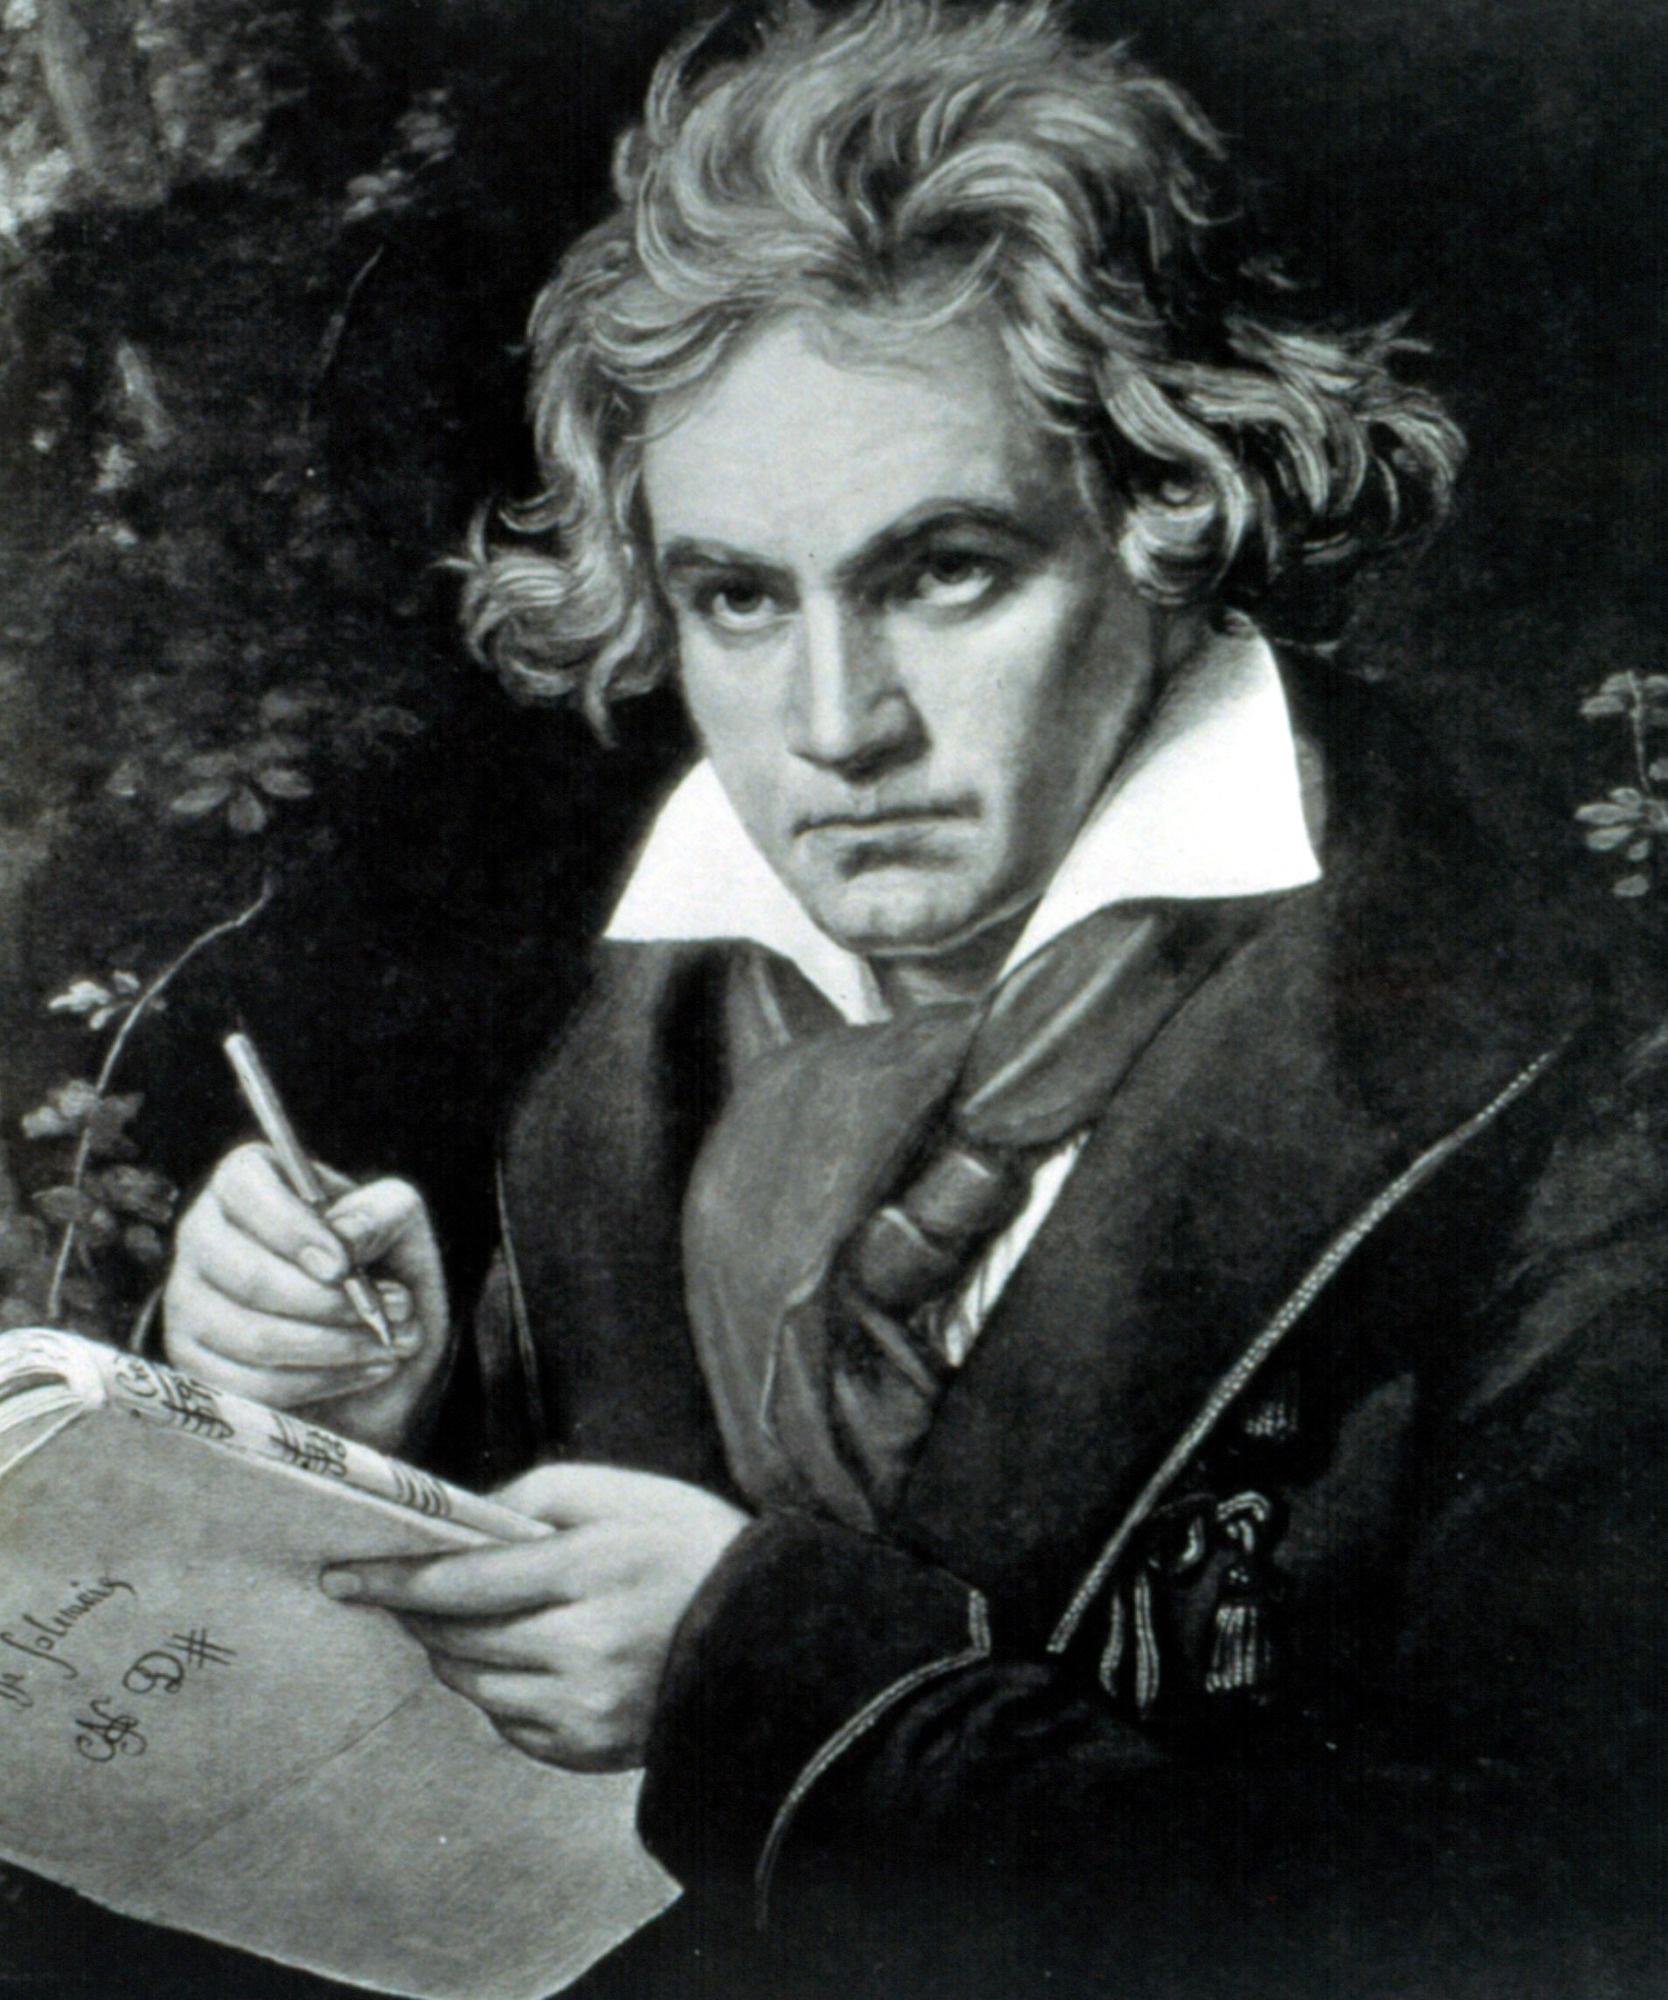 Study: Genomic analyses of hair from Ludwig van Beethoven. Everett Collection / Shutterstock